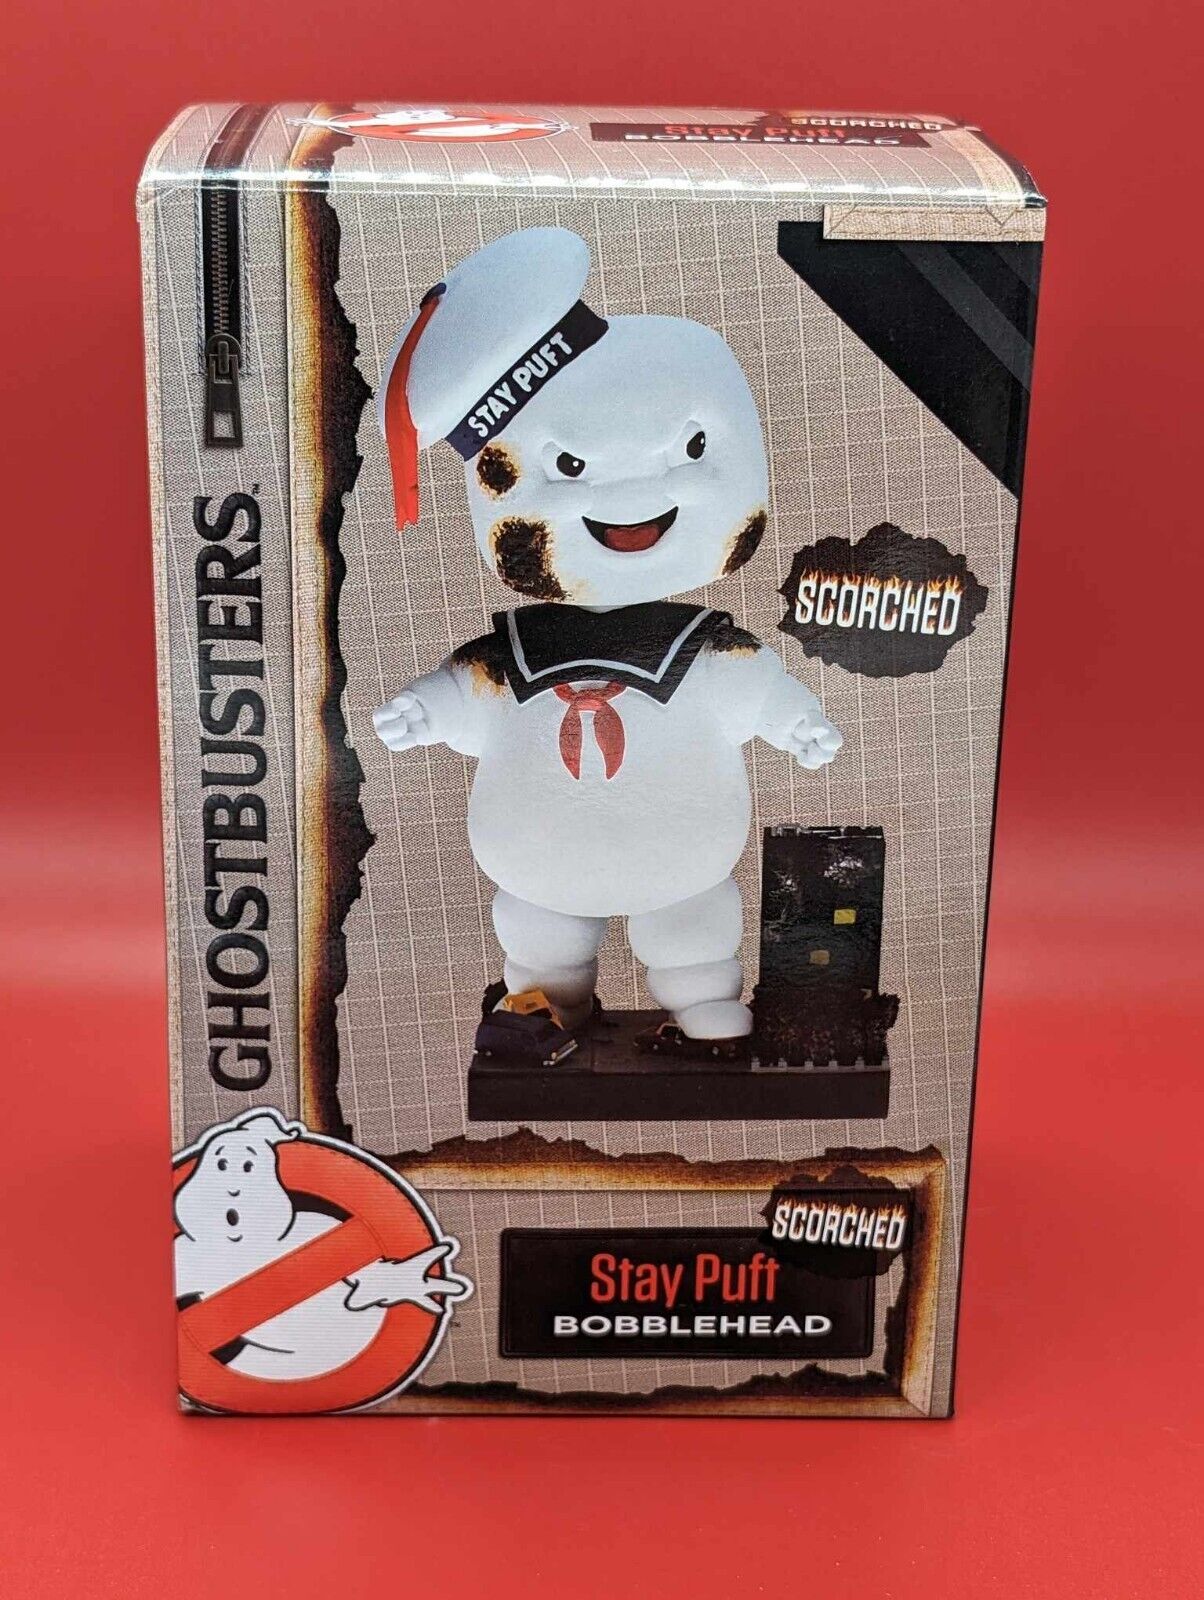 Stay Puft Ghostbusters Scorched Marshmallow Bobblehead Royal Bobbles Brand New